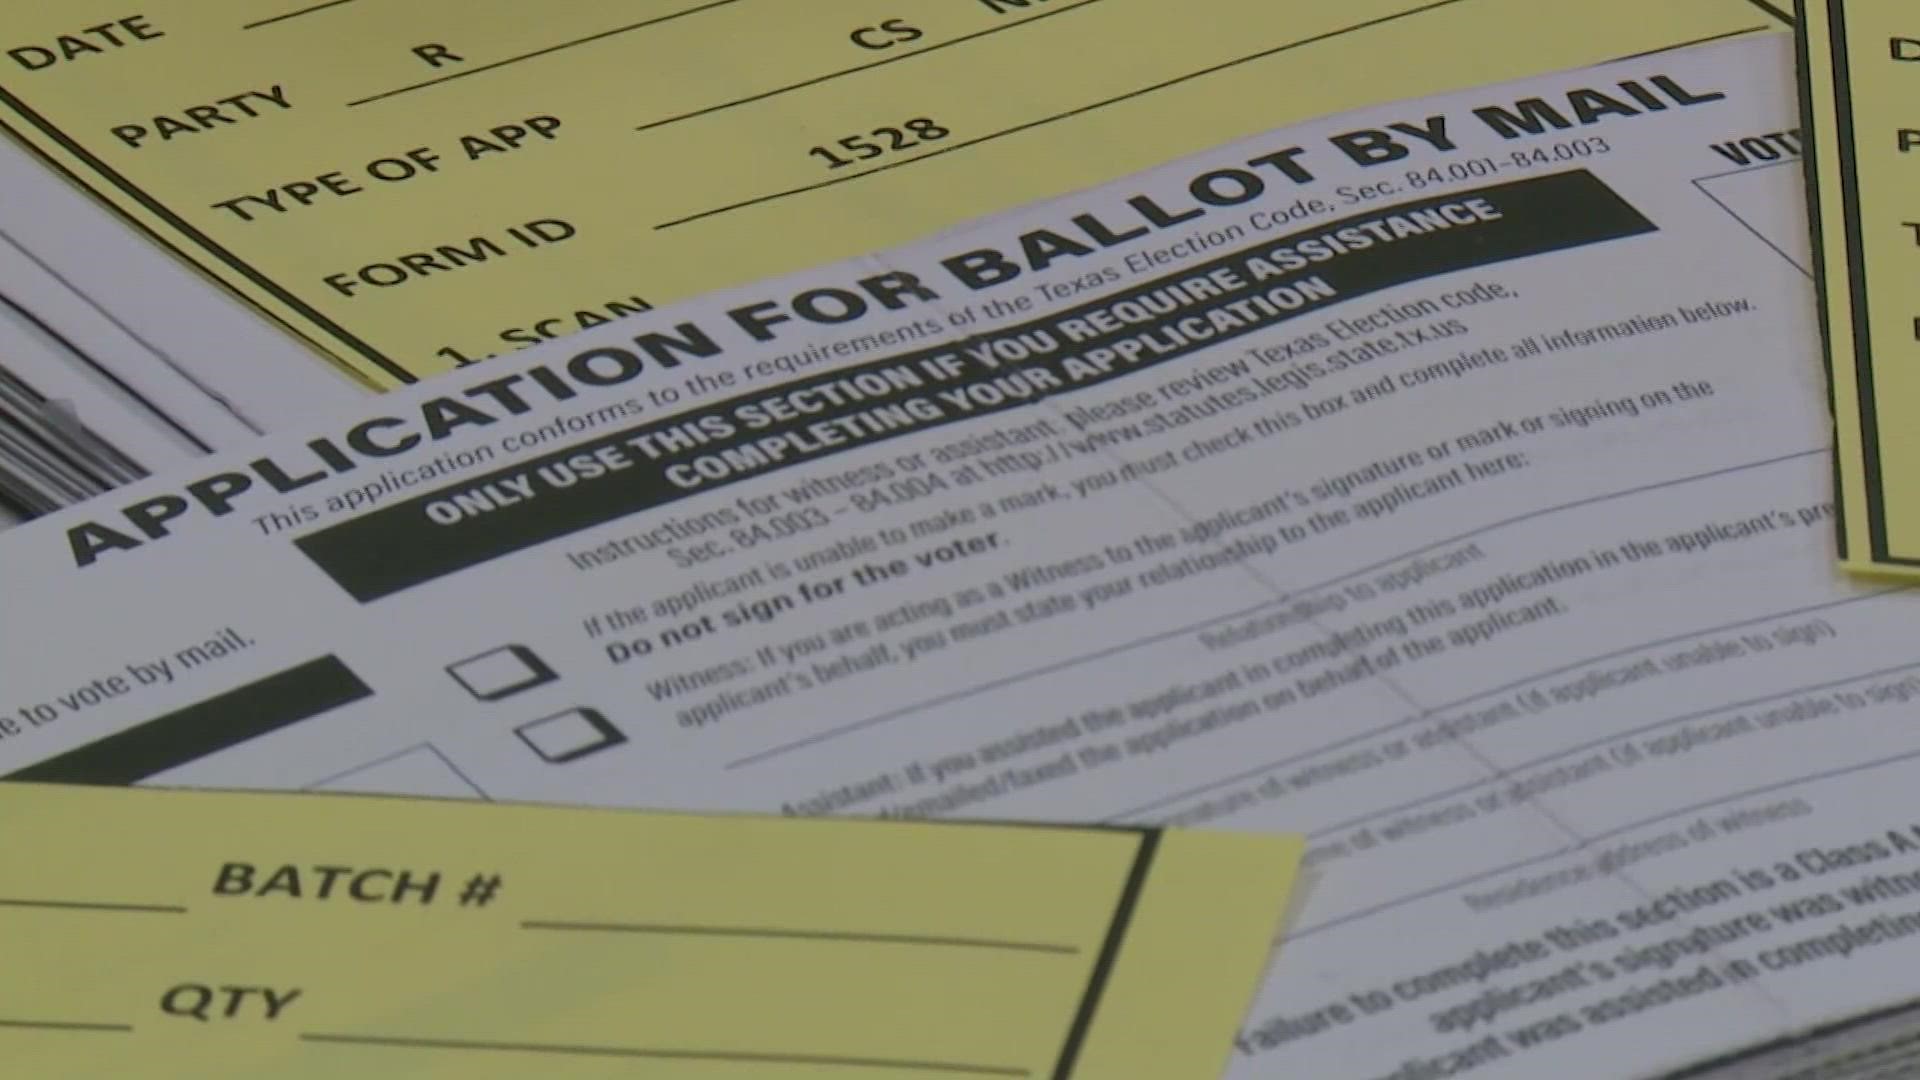 A team of 30 is checking thousands of ballots by hand in a race to resurrect rejected mail-in ballot applications.